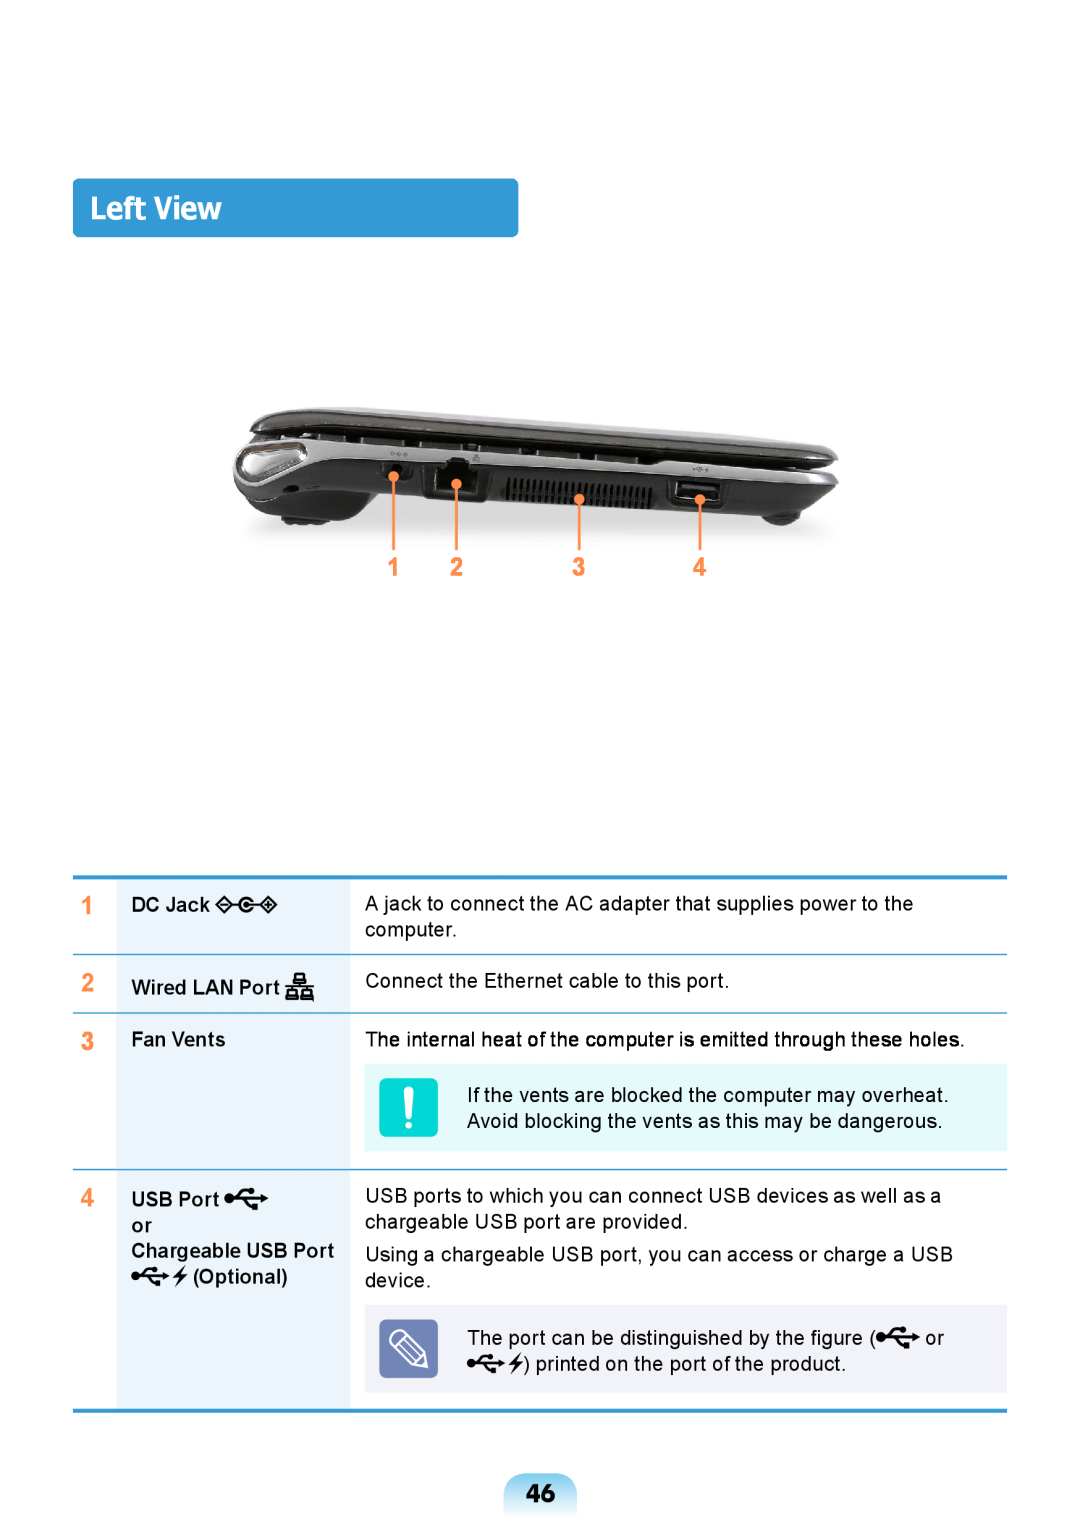 Samsung NP-RV408-A01VN manual Left View, DC Jack, Wired LAN Port, Fan Vents, USB Port or Chargeable USB Port Optional 